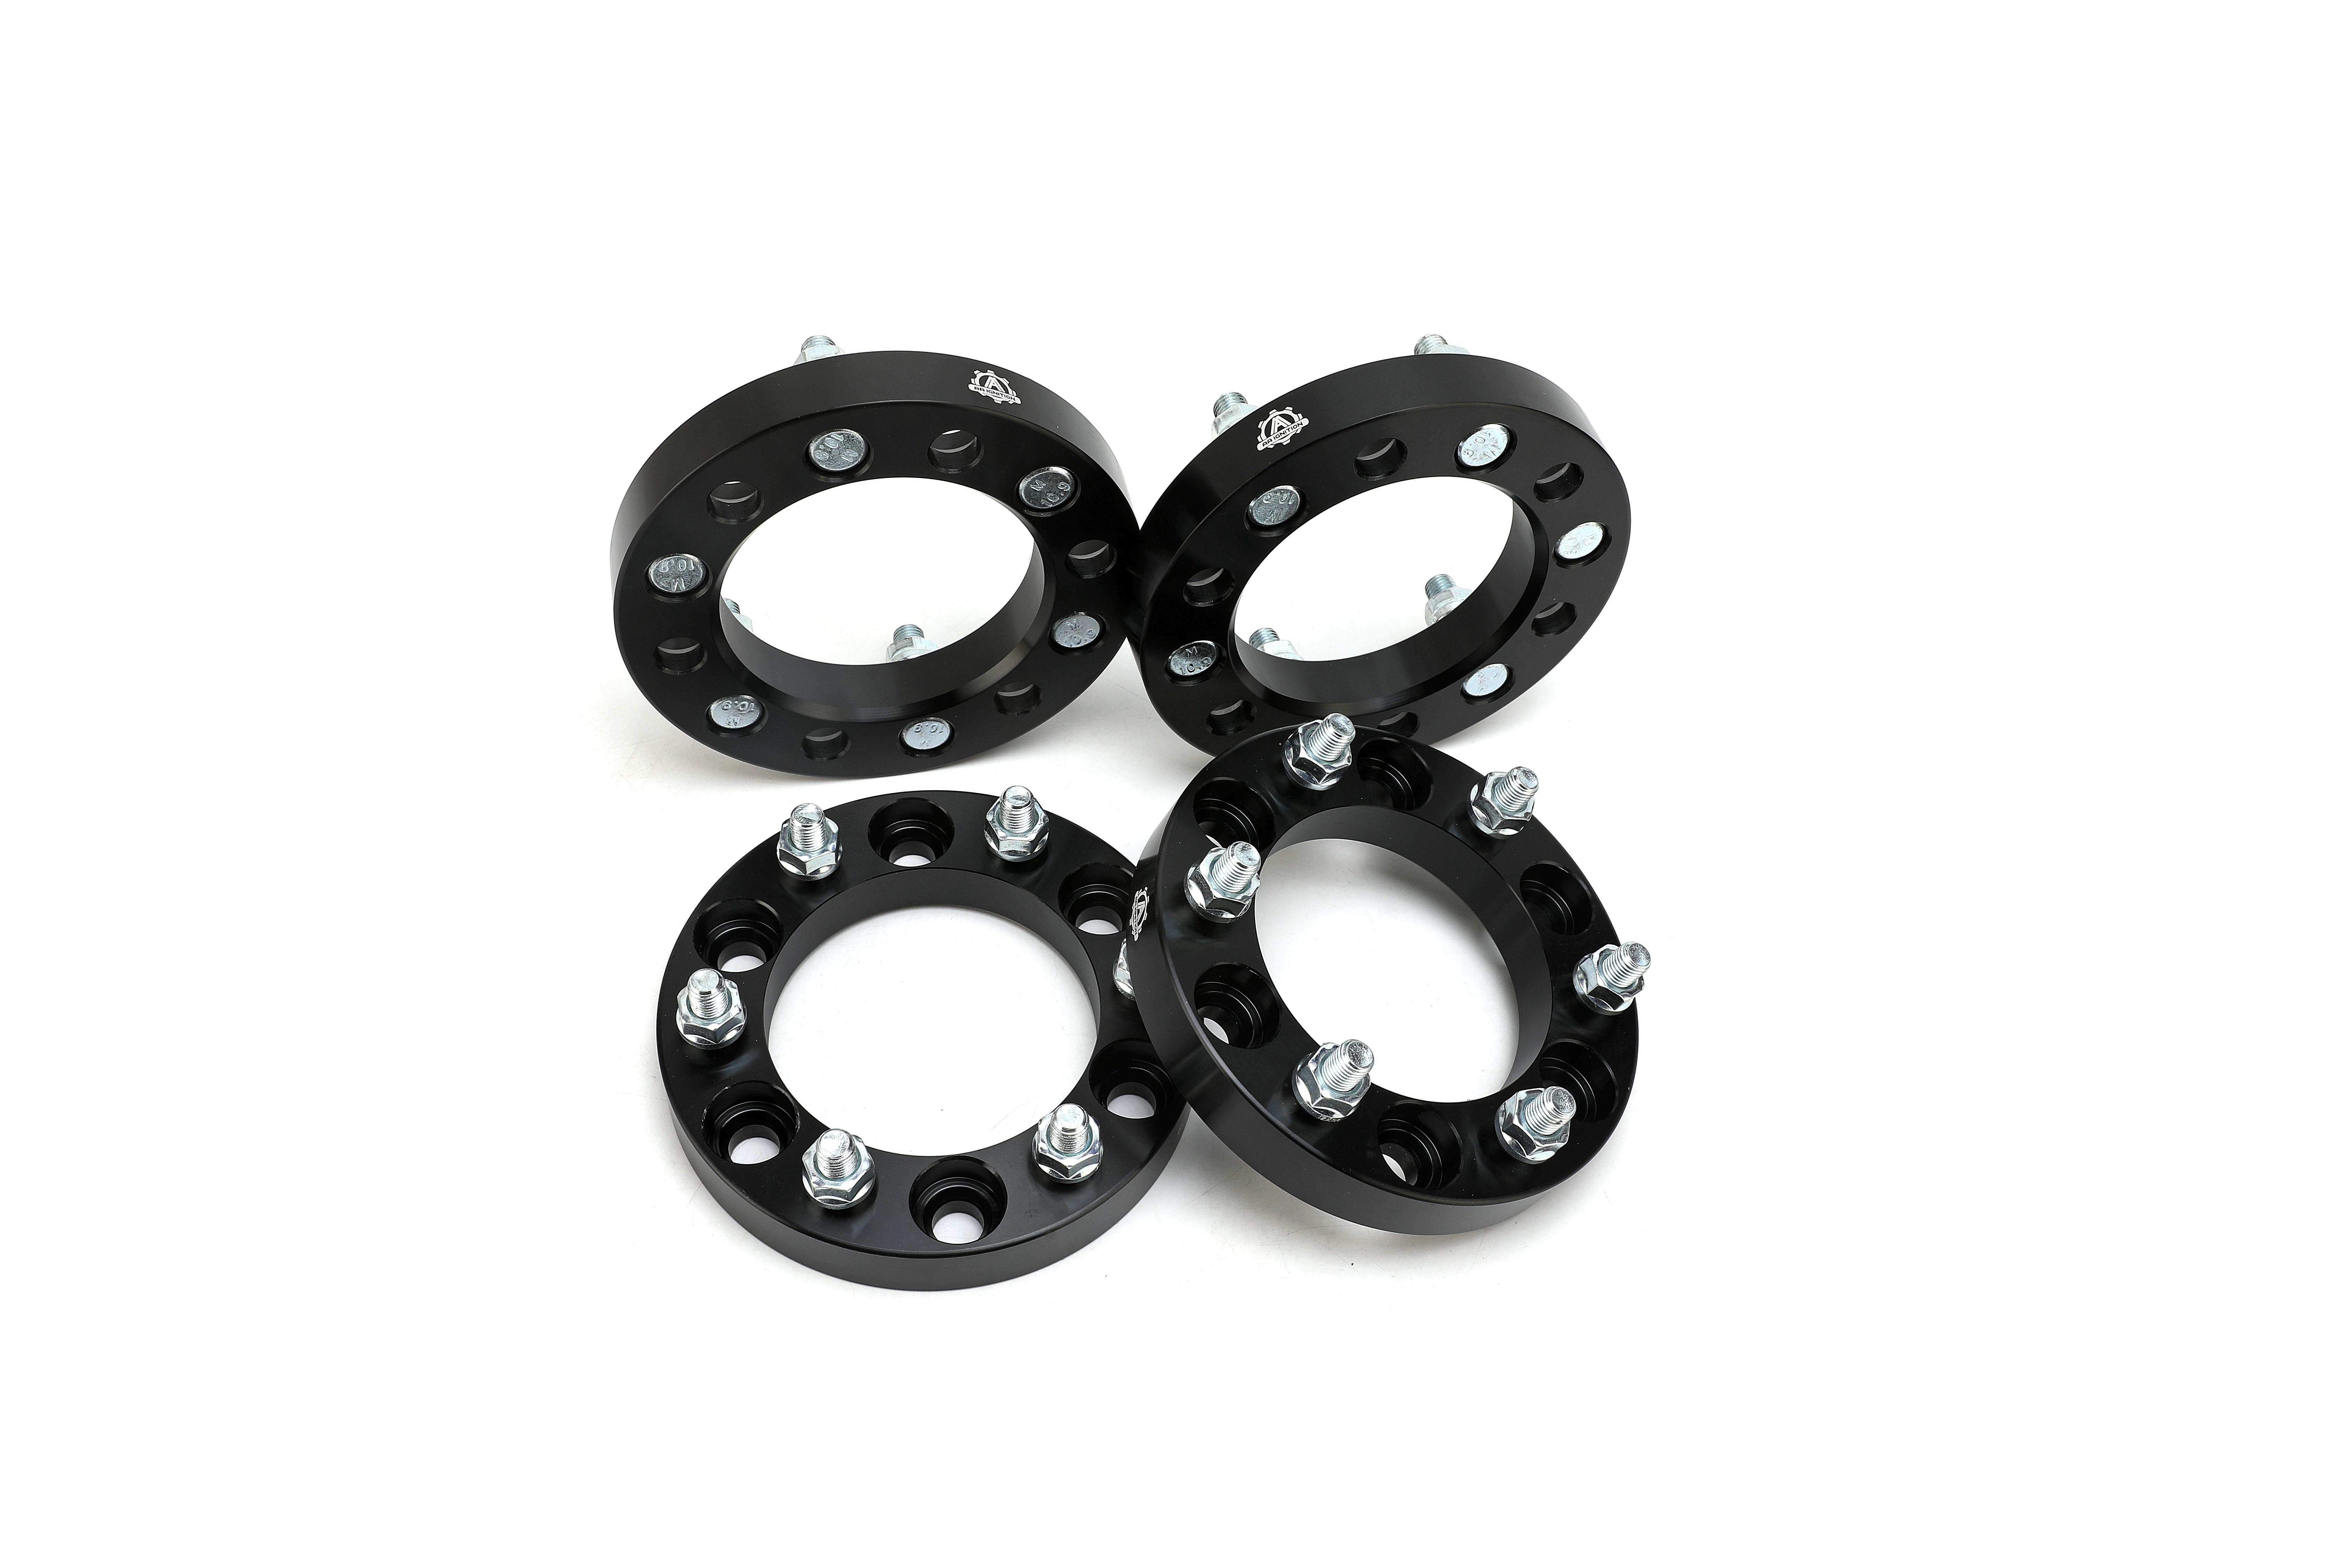 Wheel Spacer Set of 4 - 1 inch Thick 25mm Wheel Lug Centric 6x139.7mm - Fits Toyota Vehicles Image